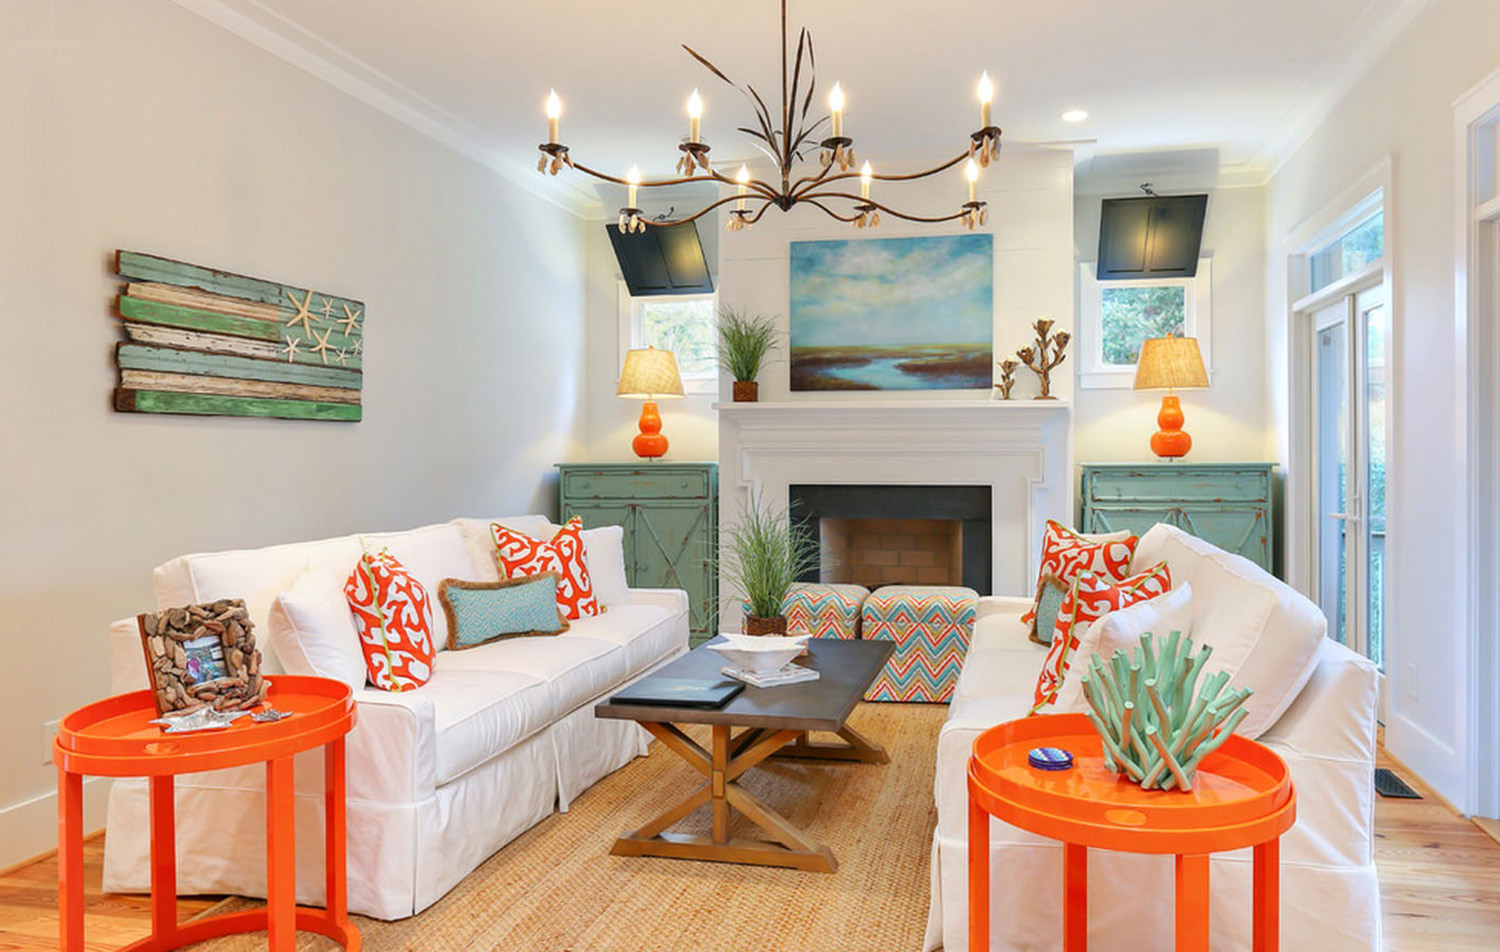 How to choose the right color for your living room